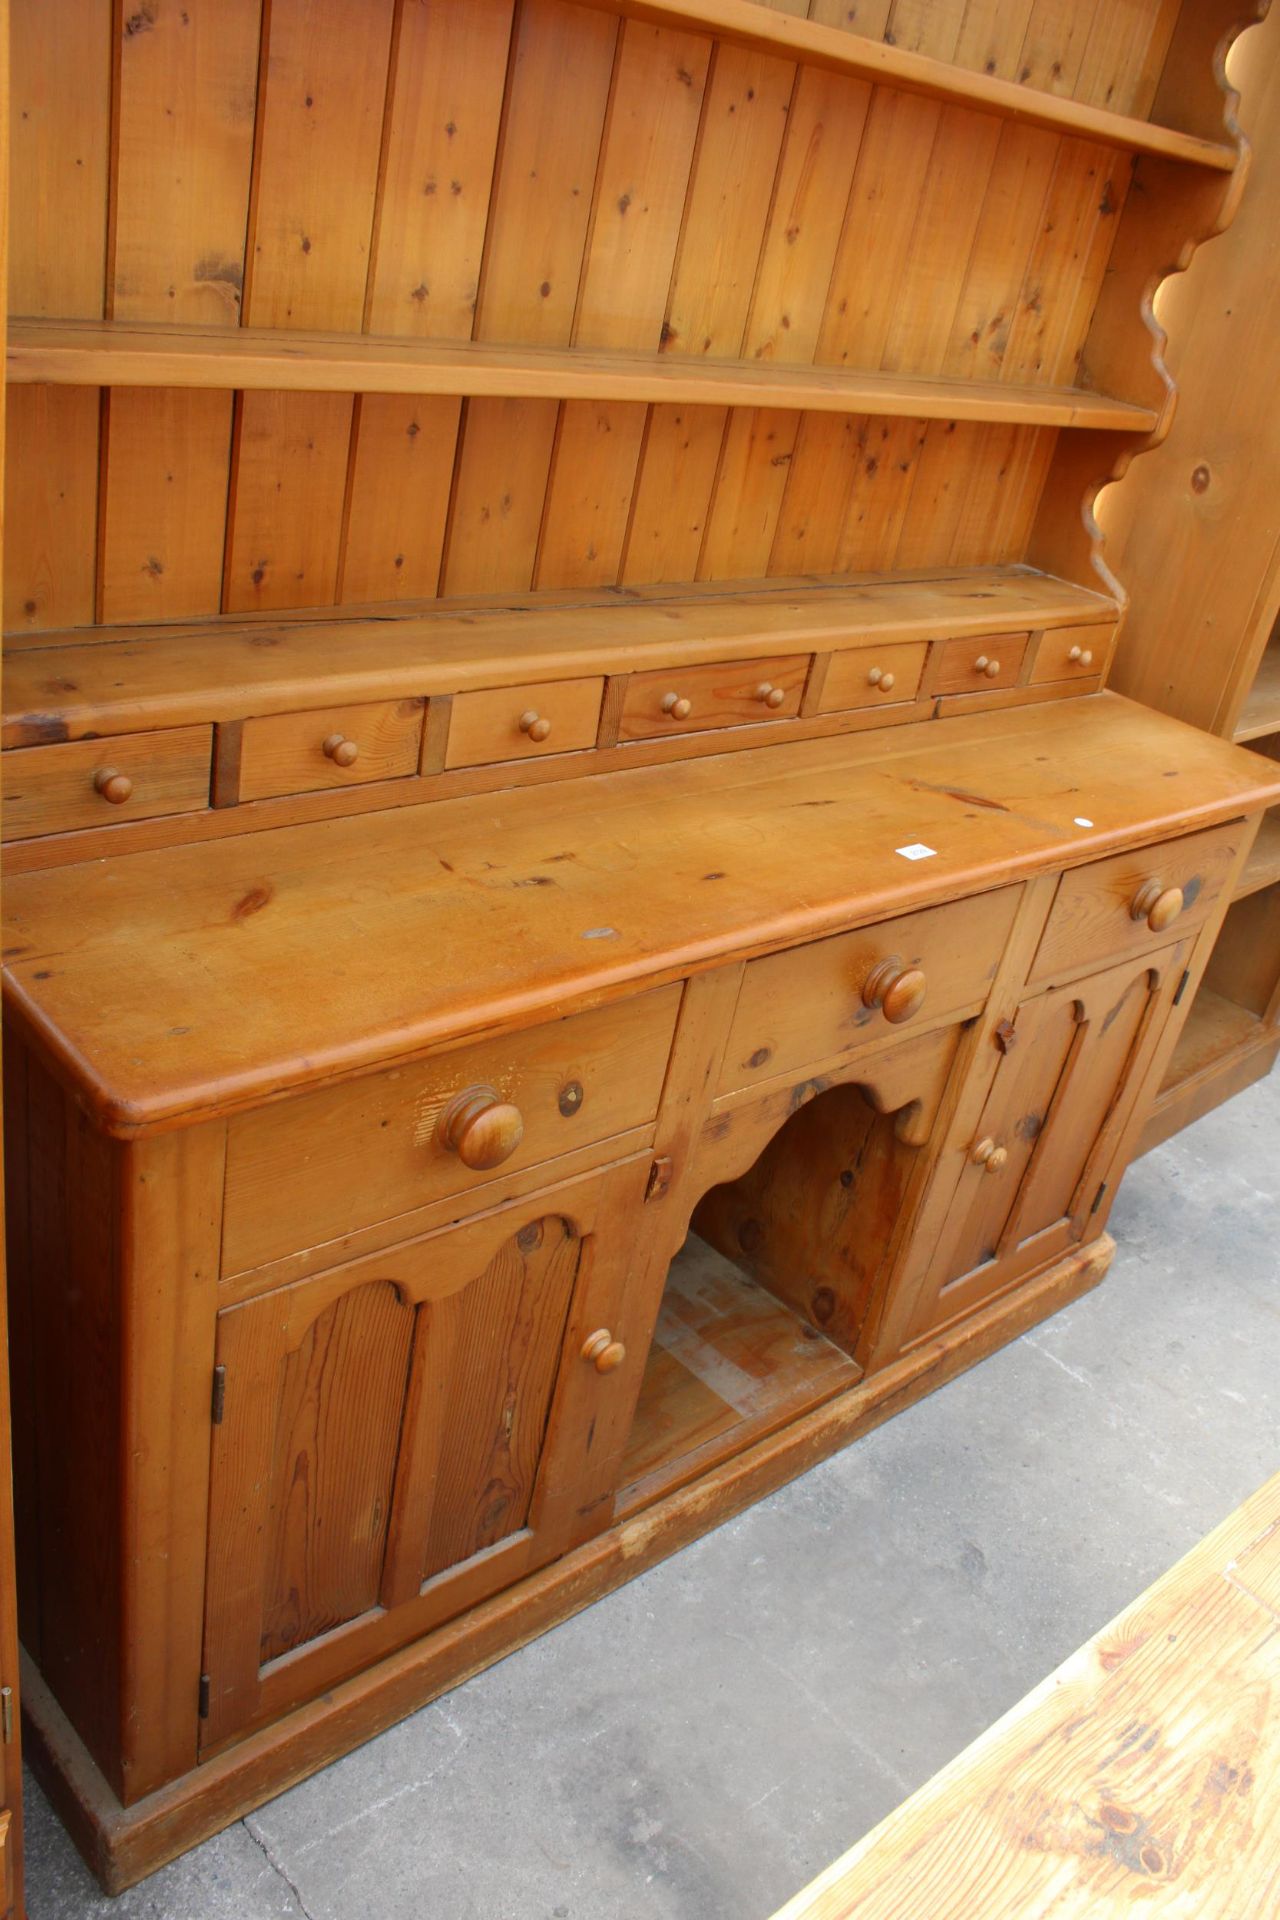 A VICTORIAN STYLE PINE KITCHEN DRESSER WITH PLATE RACK ENCLOSING SEVEN SPICE DRAWERS, THE BASE - Image 2 of 3